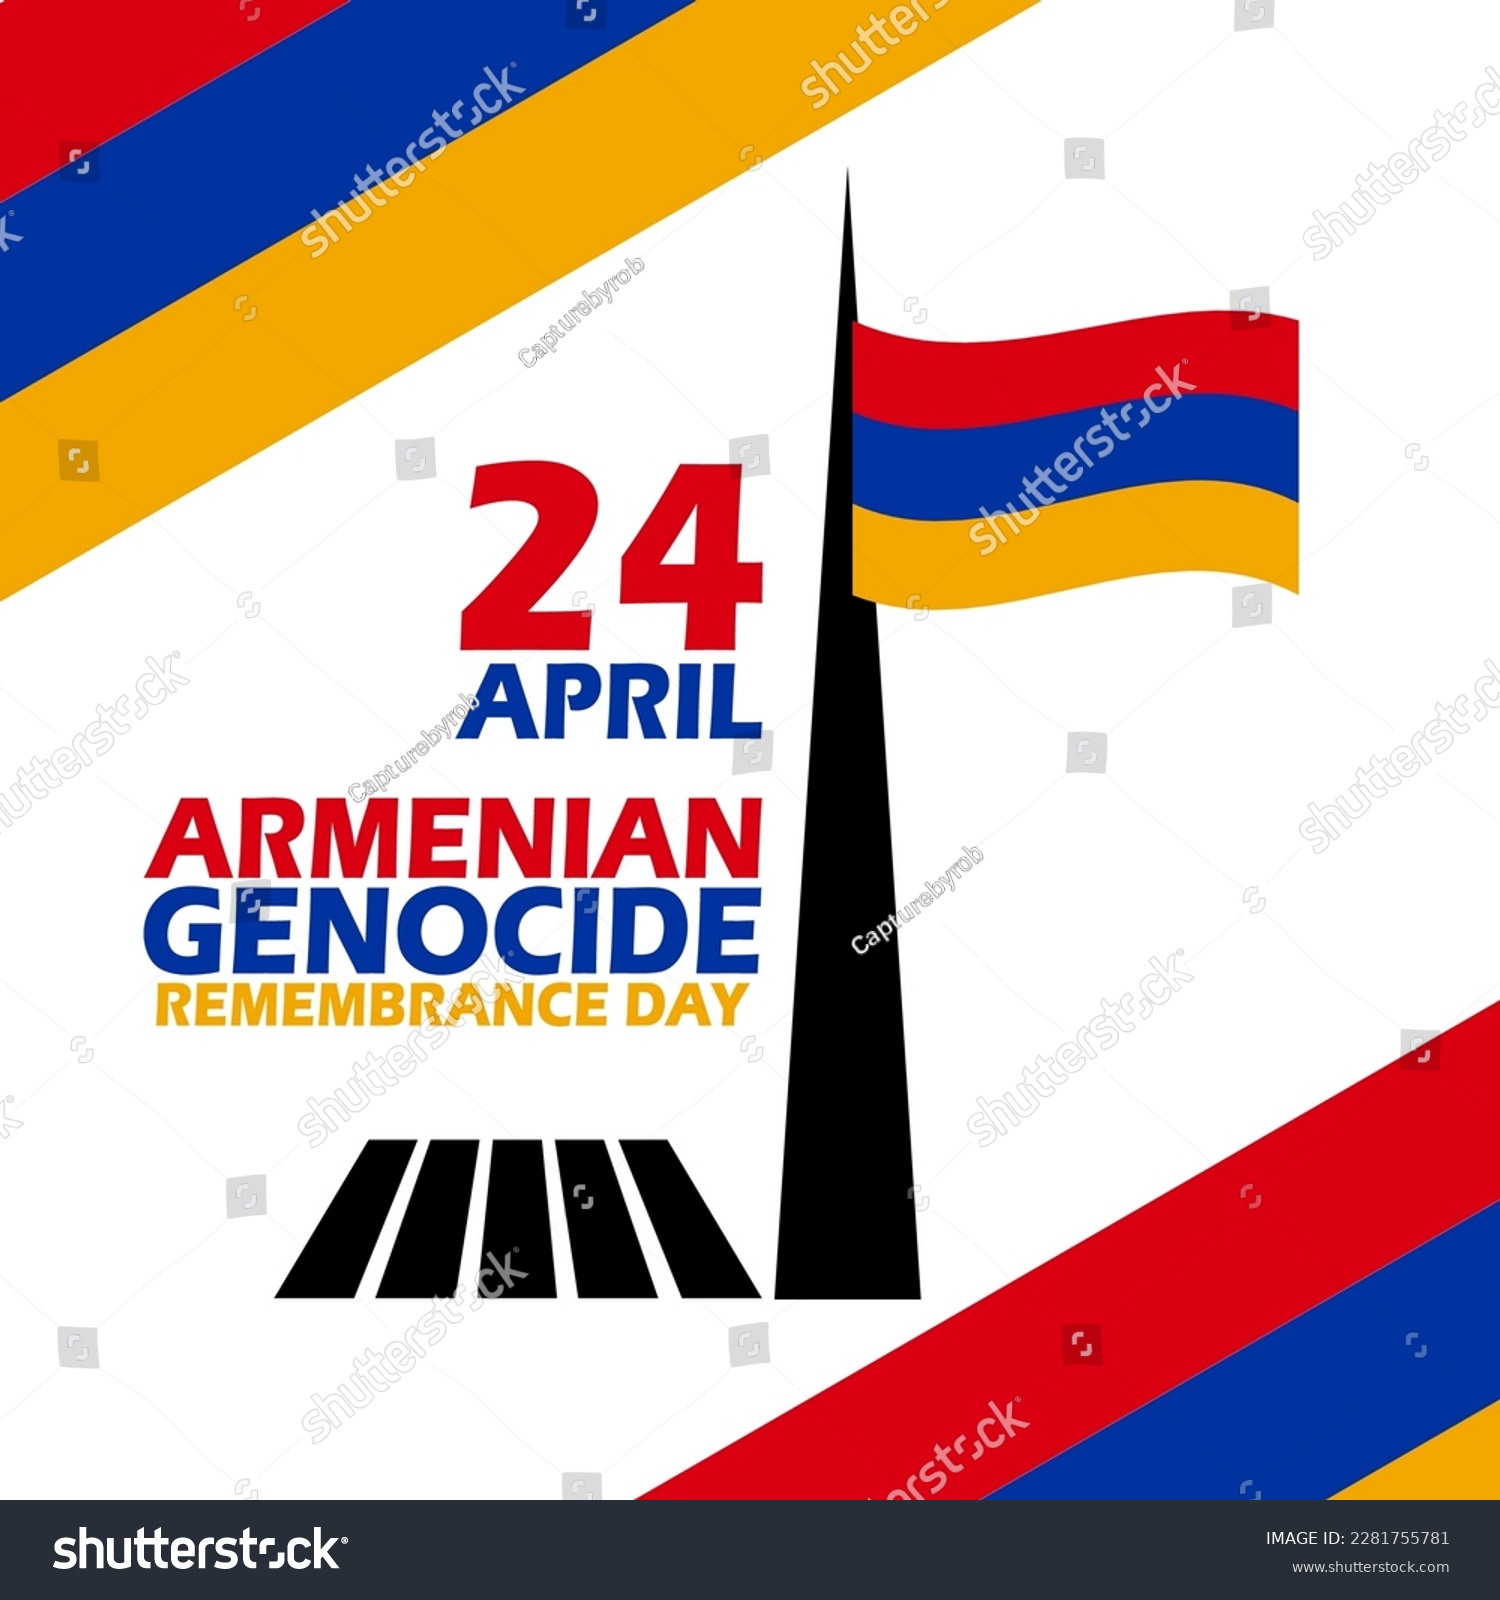 SVG of Armenian flag flying on a monument with bold text on white background to commemorate Armenian Genocide Remembrance Day on April 24 svg